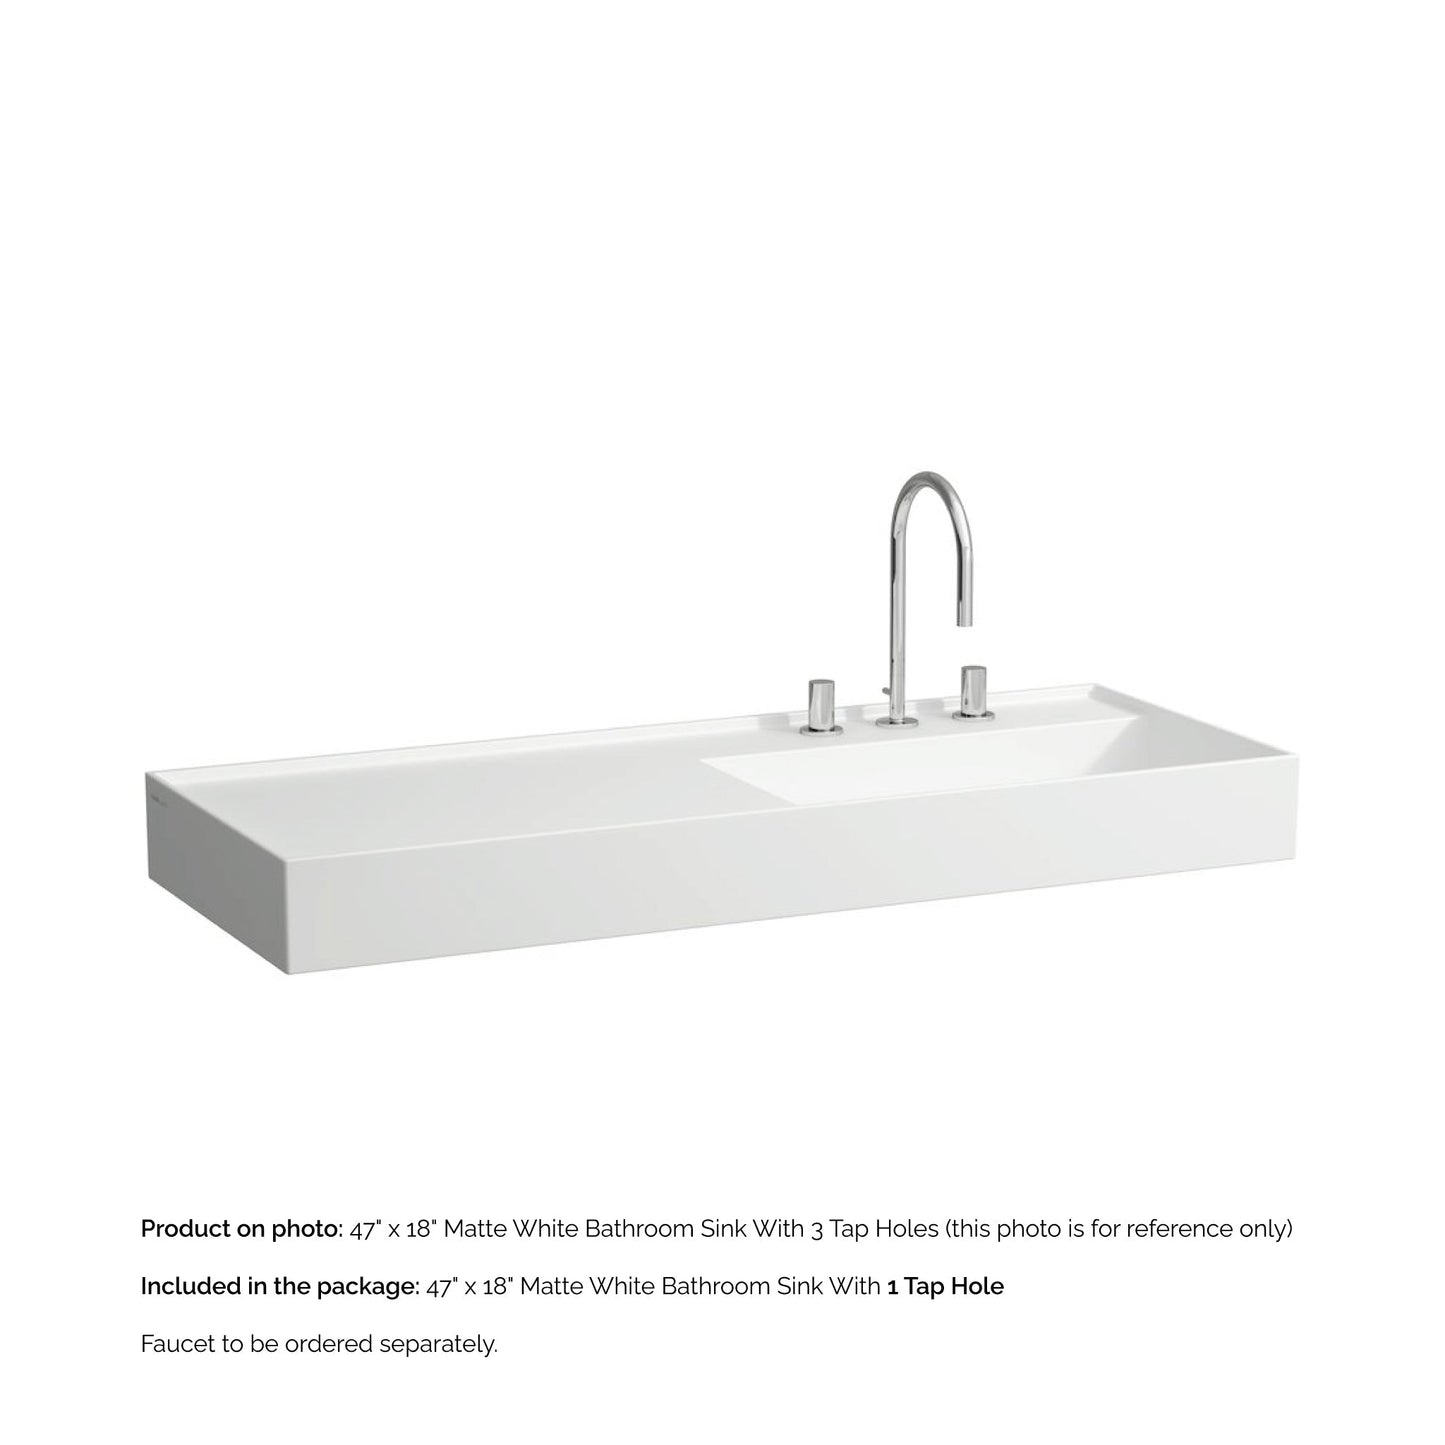 Laufen Kartell 47" x 18" Matte White Wall-Mounted Shelf-Left Bathroom Sink With Faucet Hole